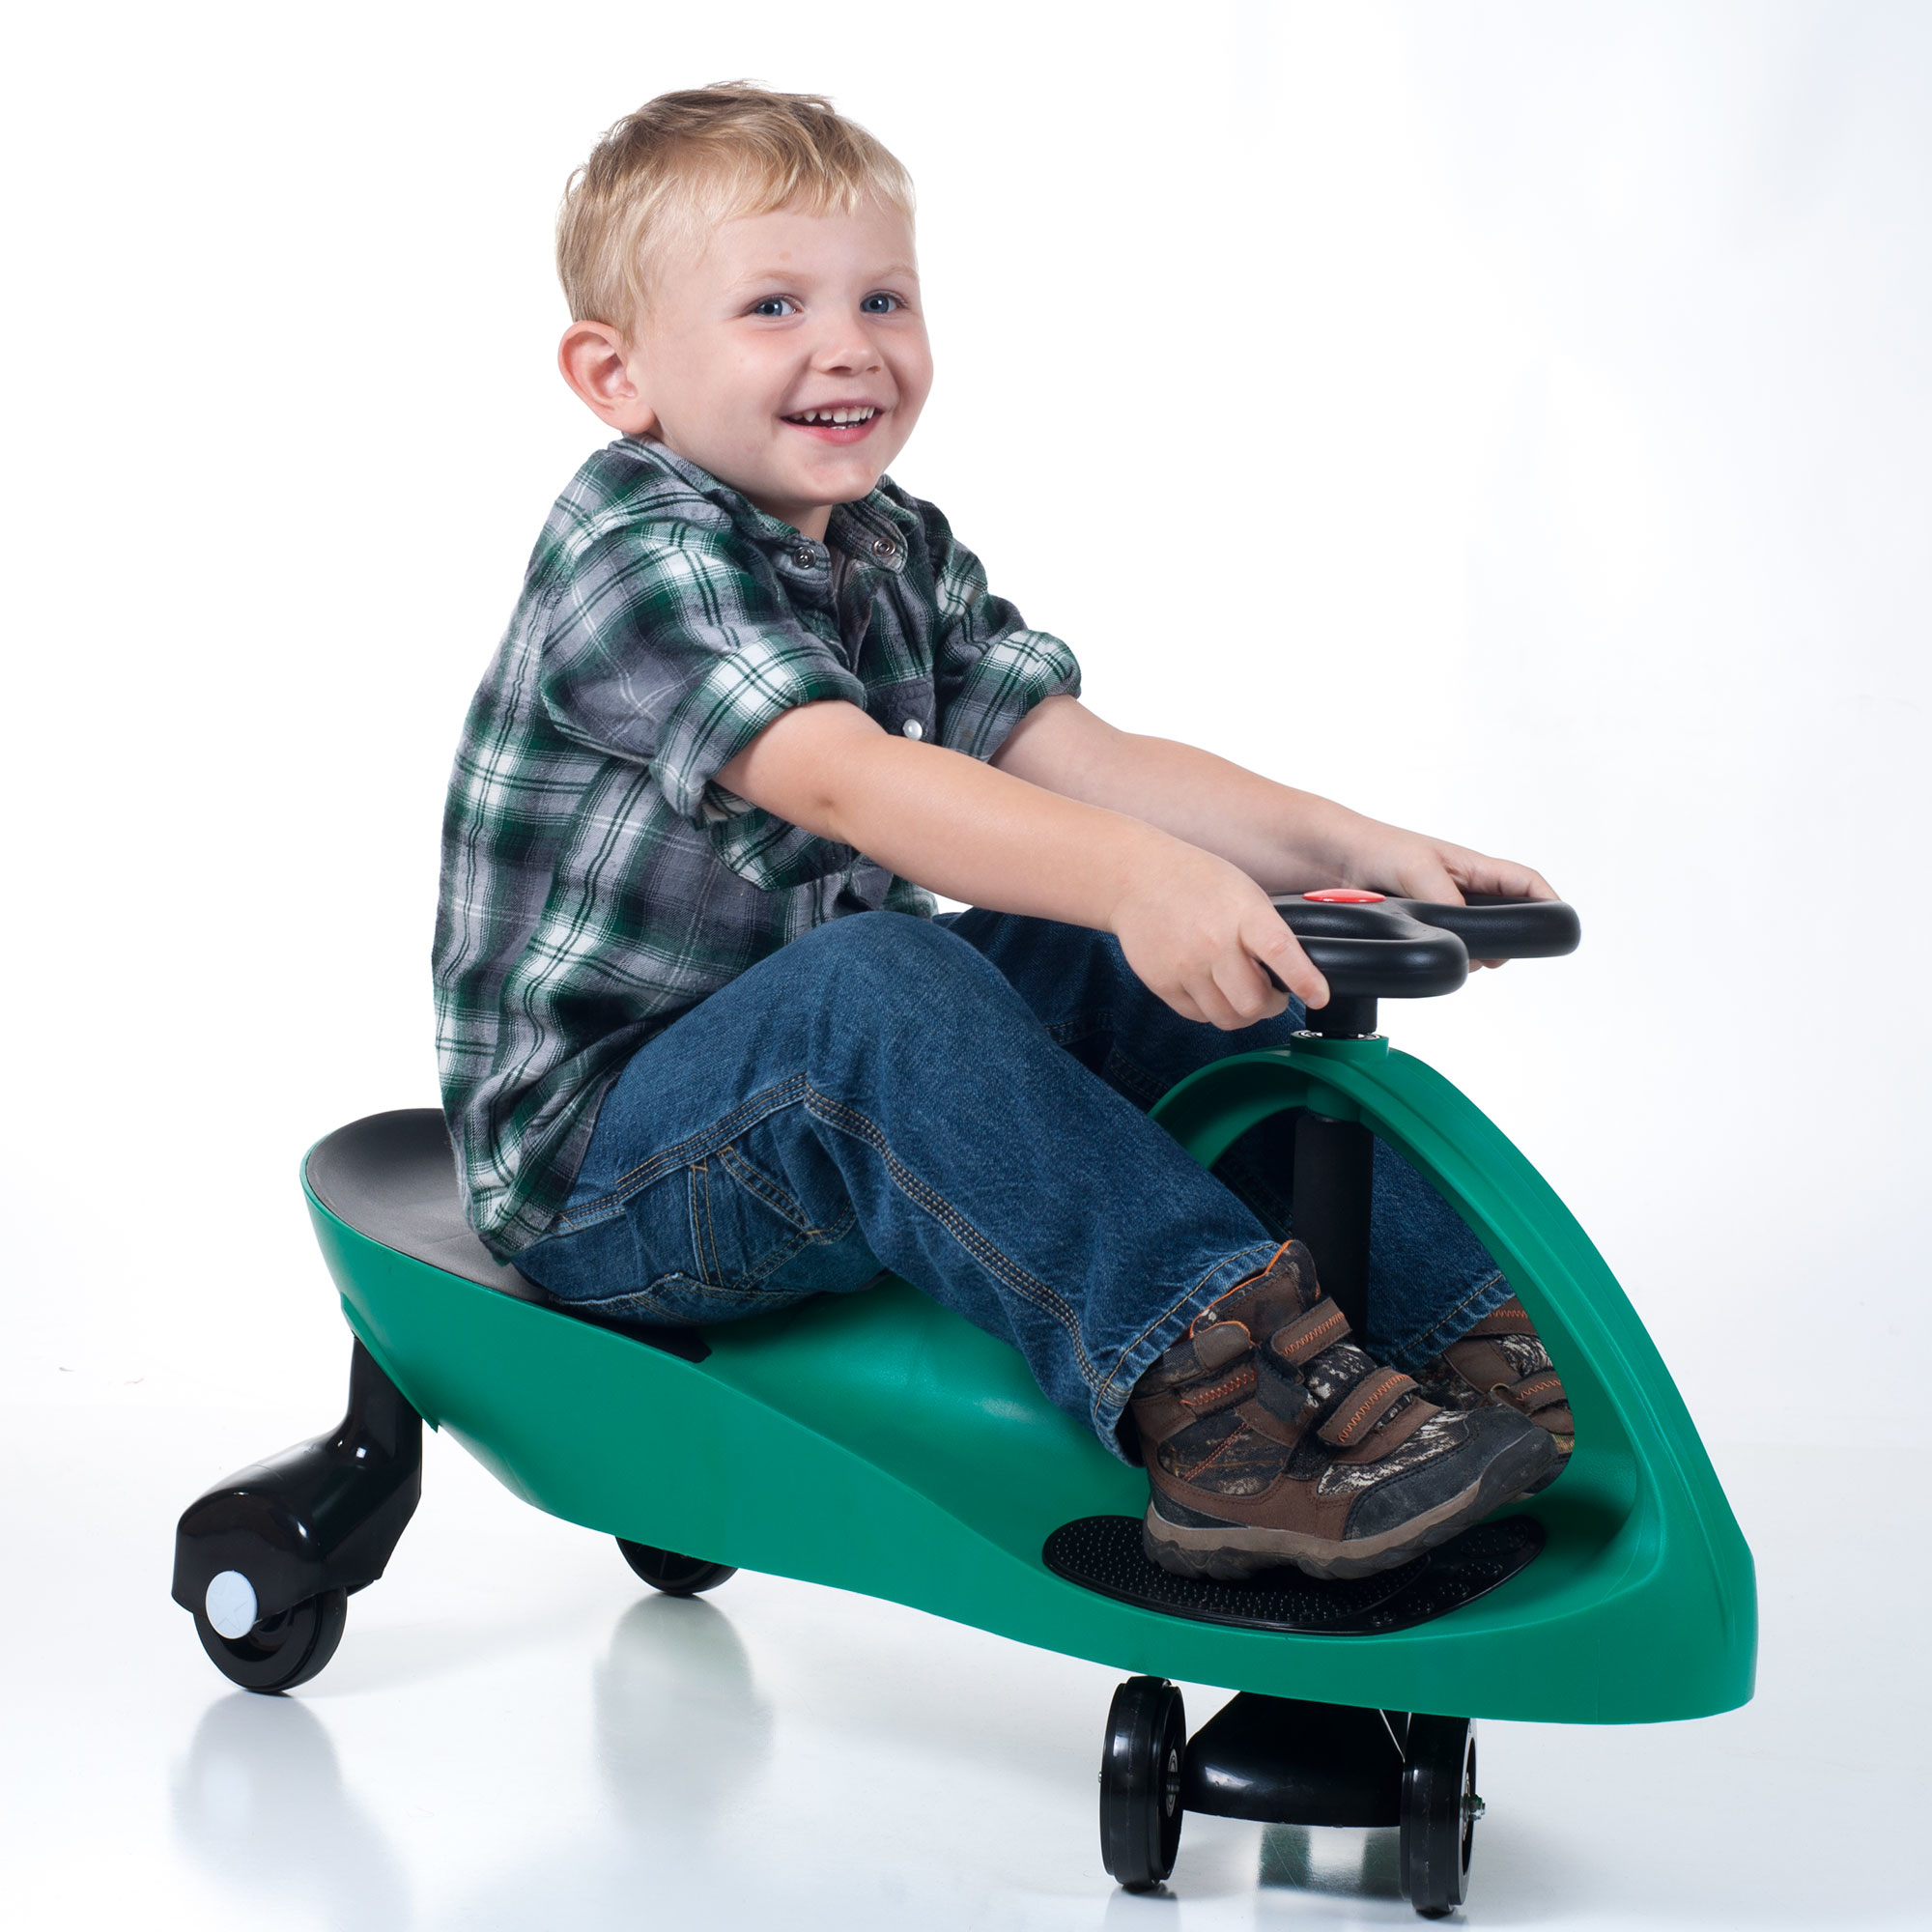 Energy Powered Twisting Zig Zag Car Ride On Toy For Kids 2 - 6 Years Old 100 Pd Weight Limit - Green